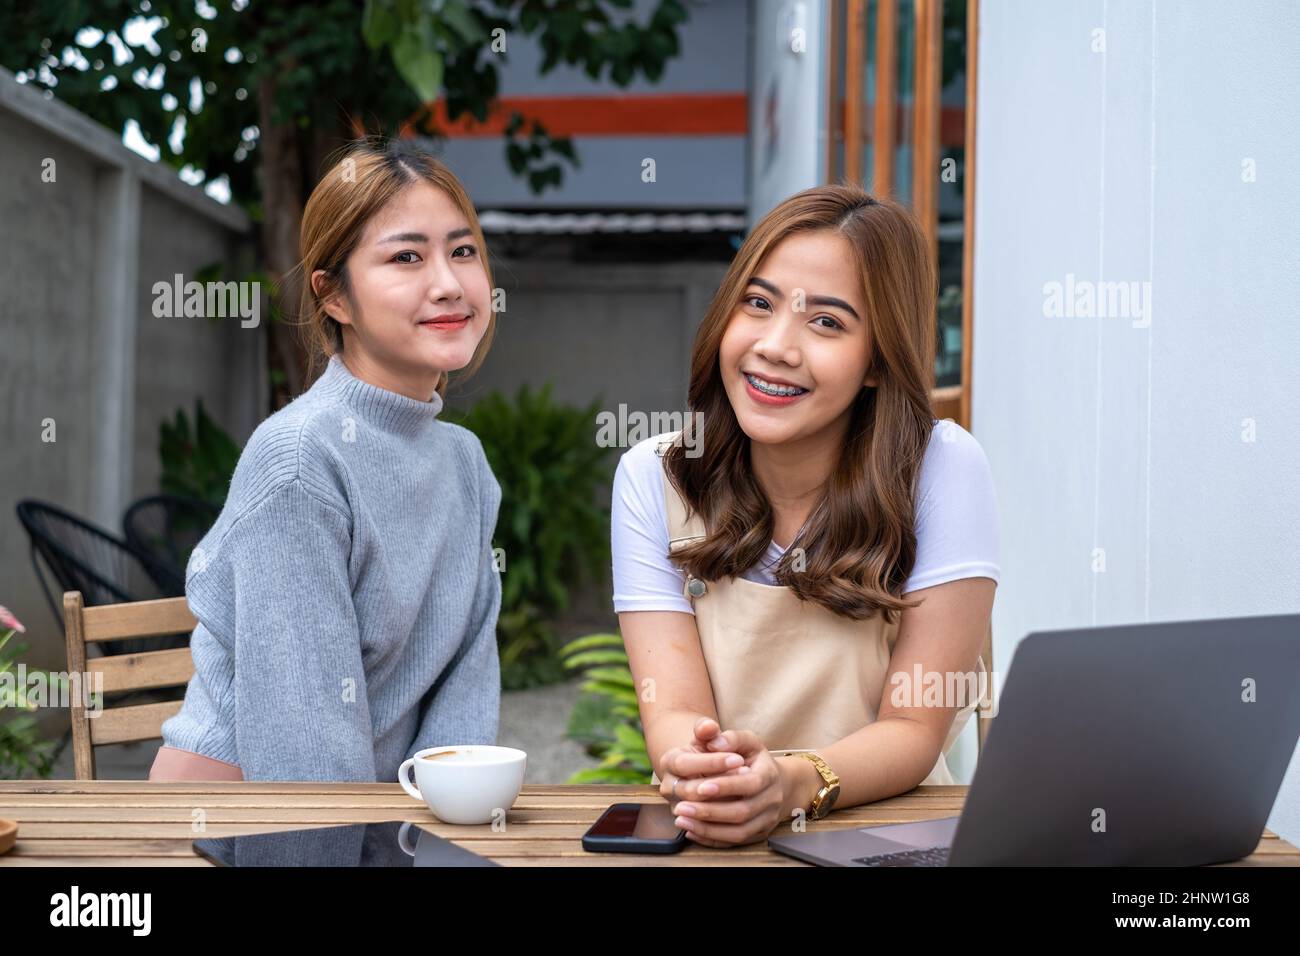 Friends Teenager Buddies Concept. Asian teen meeting at cafe and looking for friends coming. Stock Photo